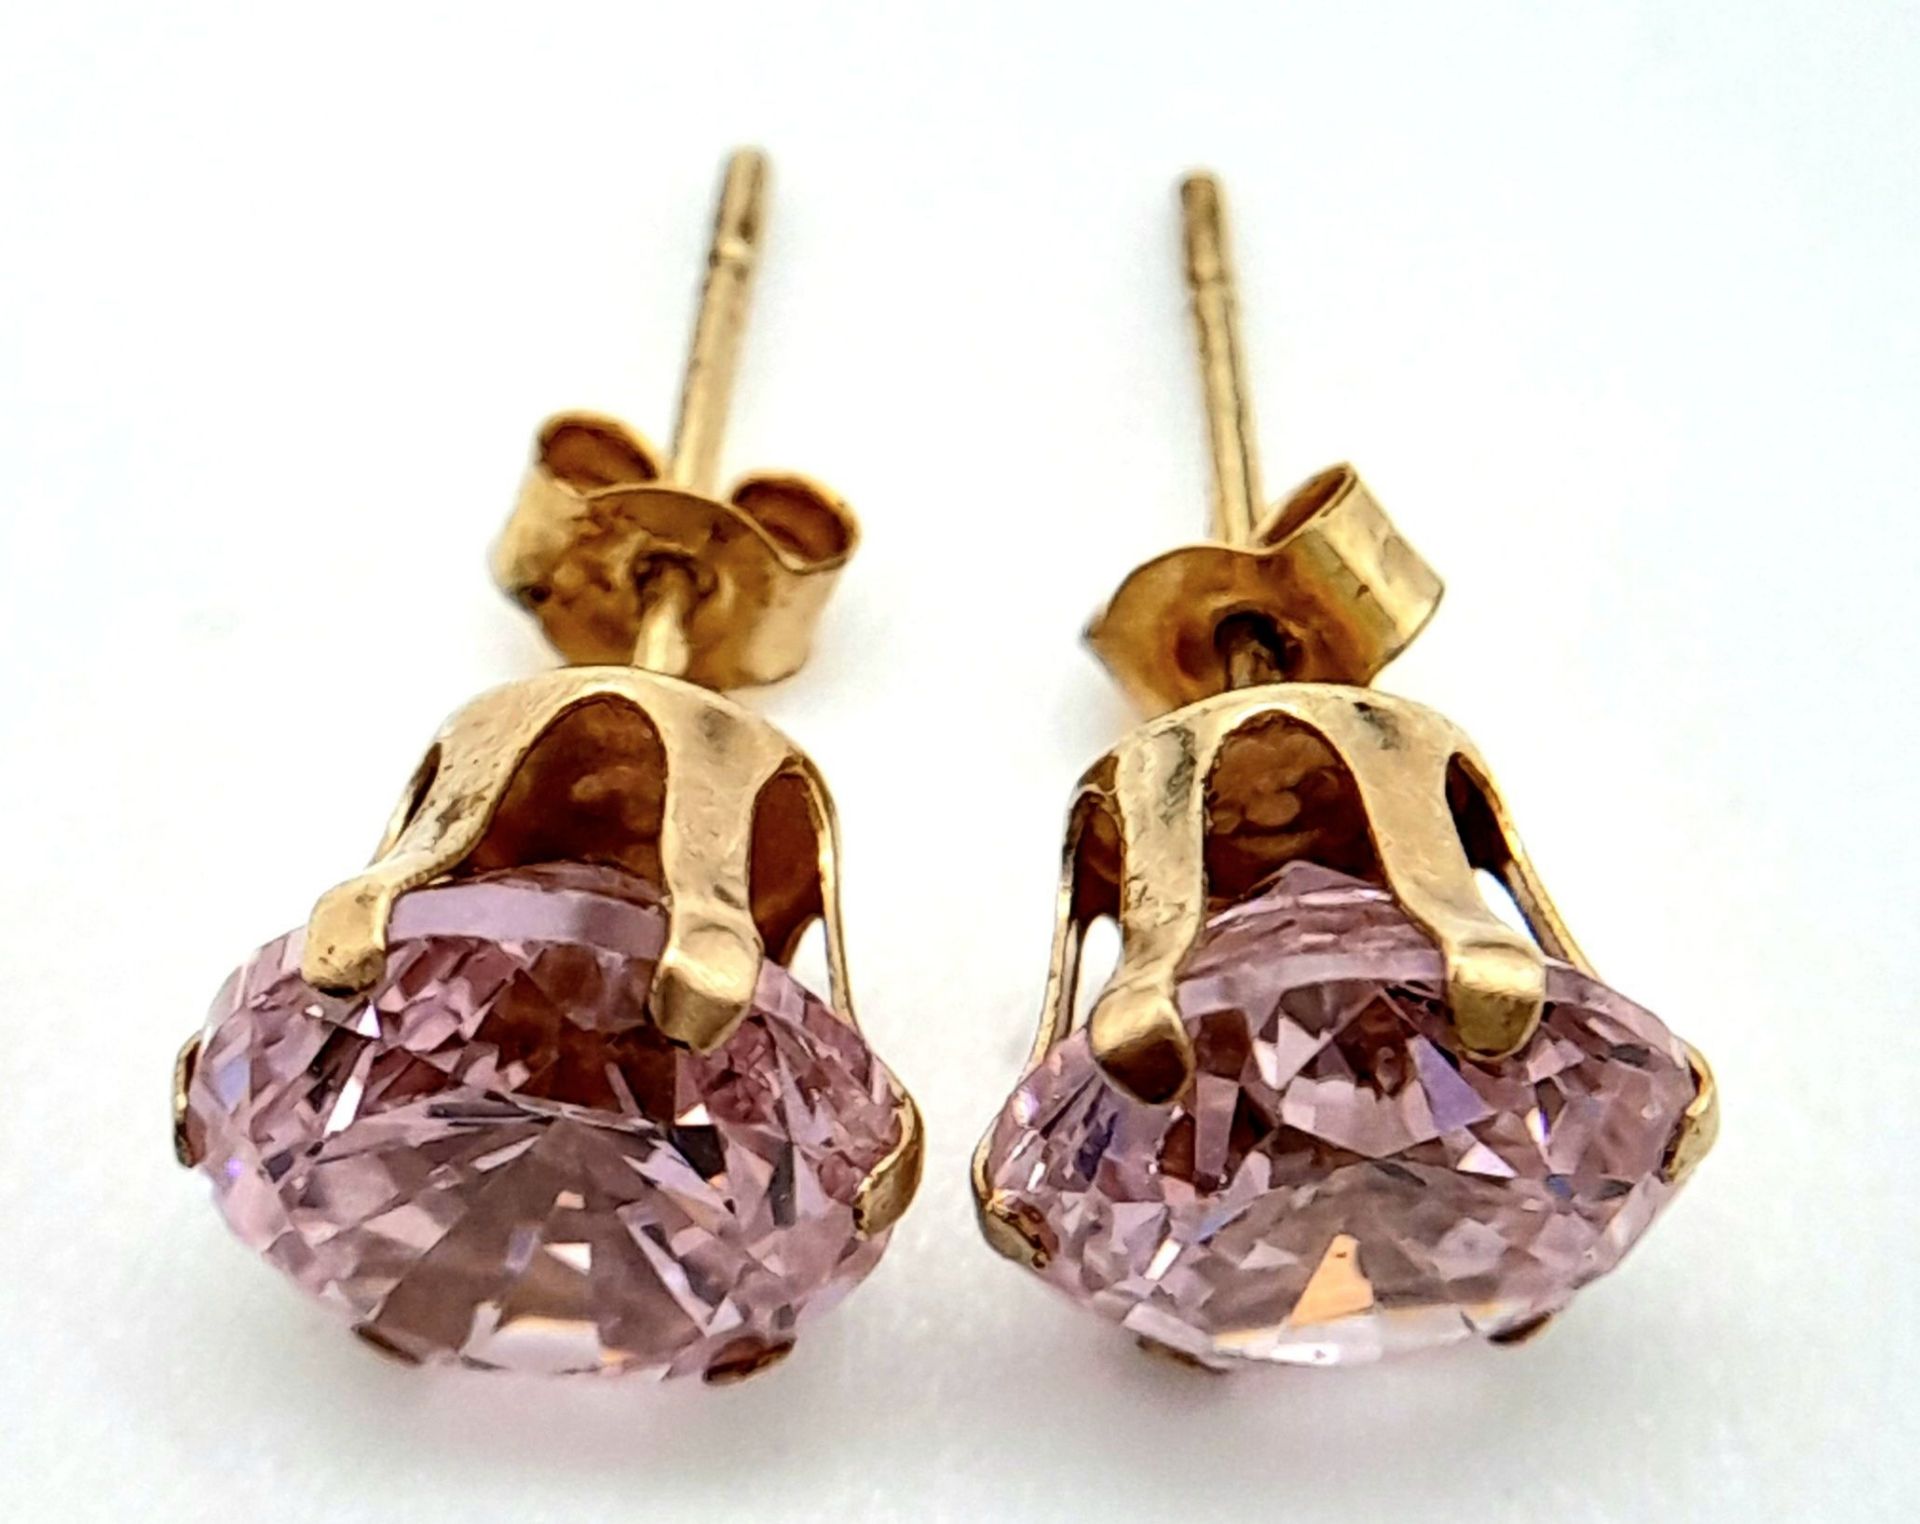 A 9 K yellow gold stud earrings with pink stones, weight: 1.4 g. - Image 3 of 5